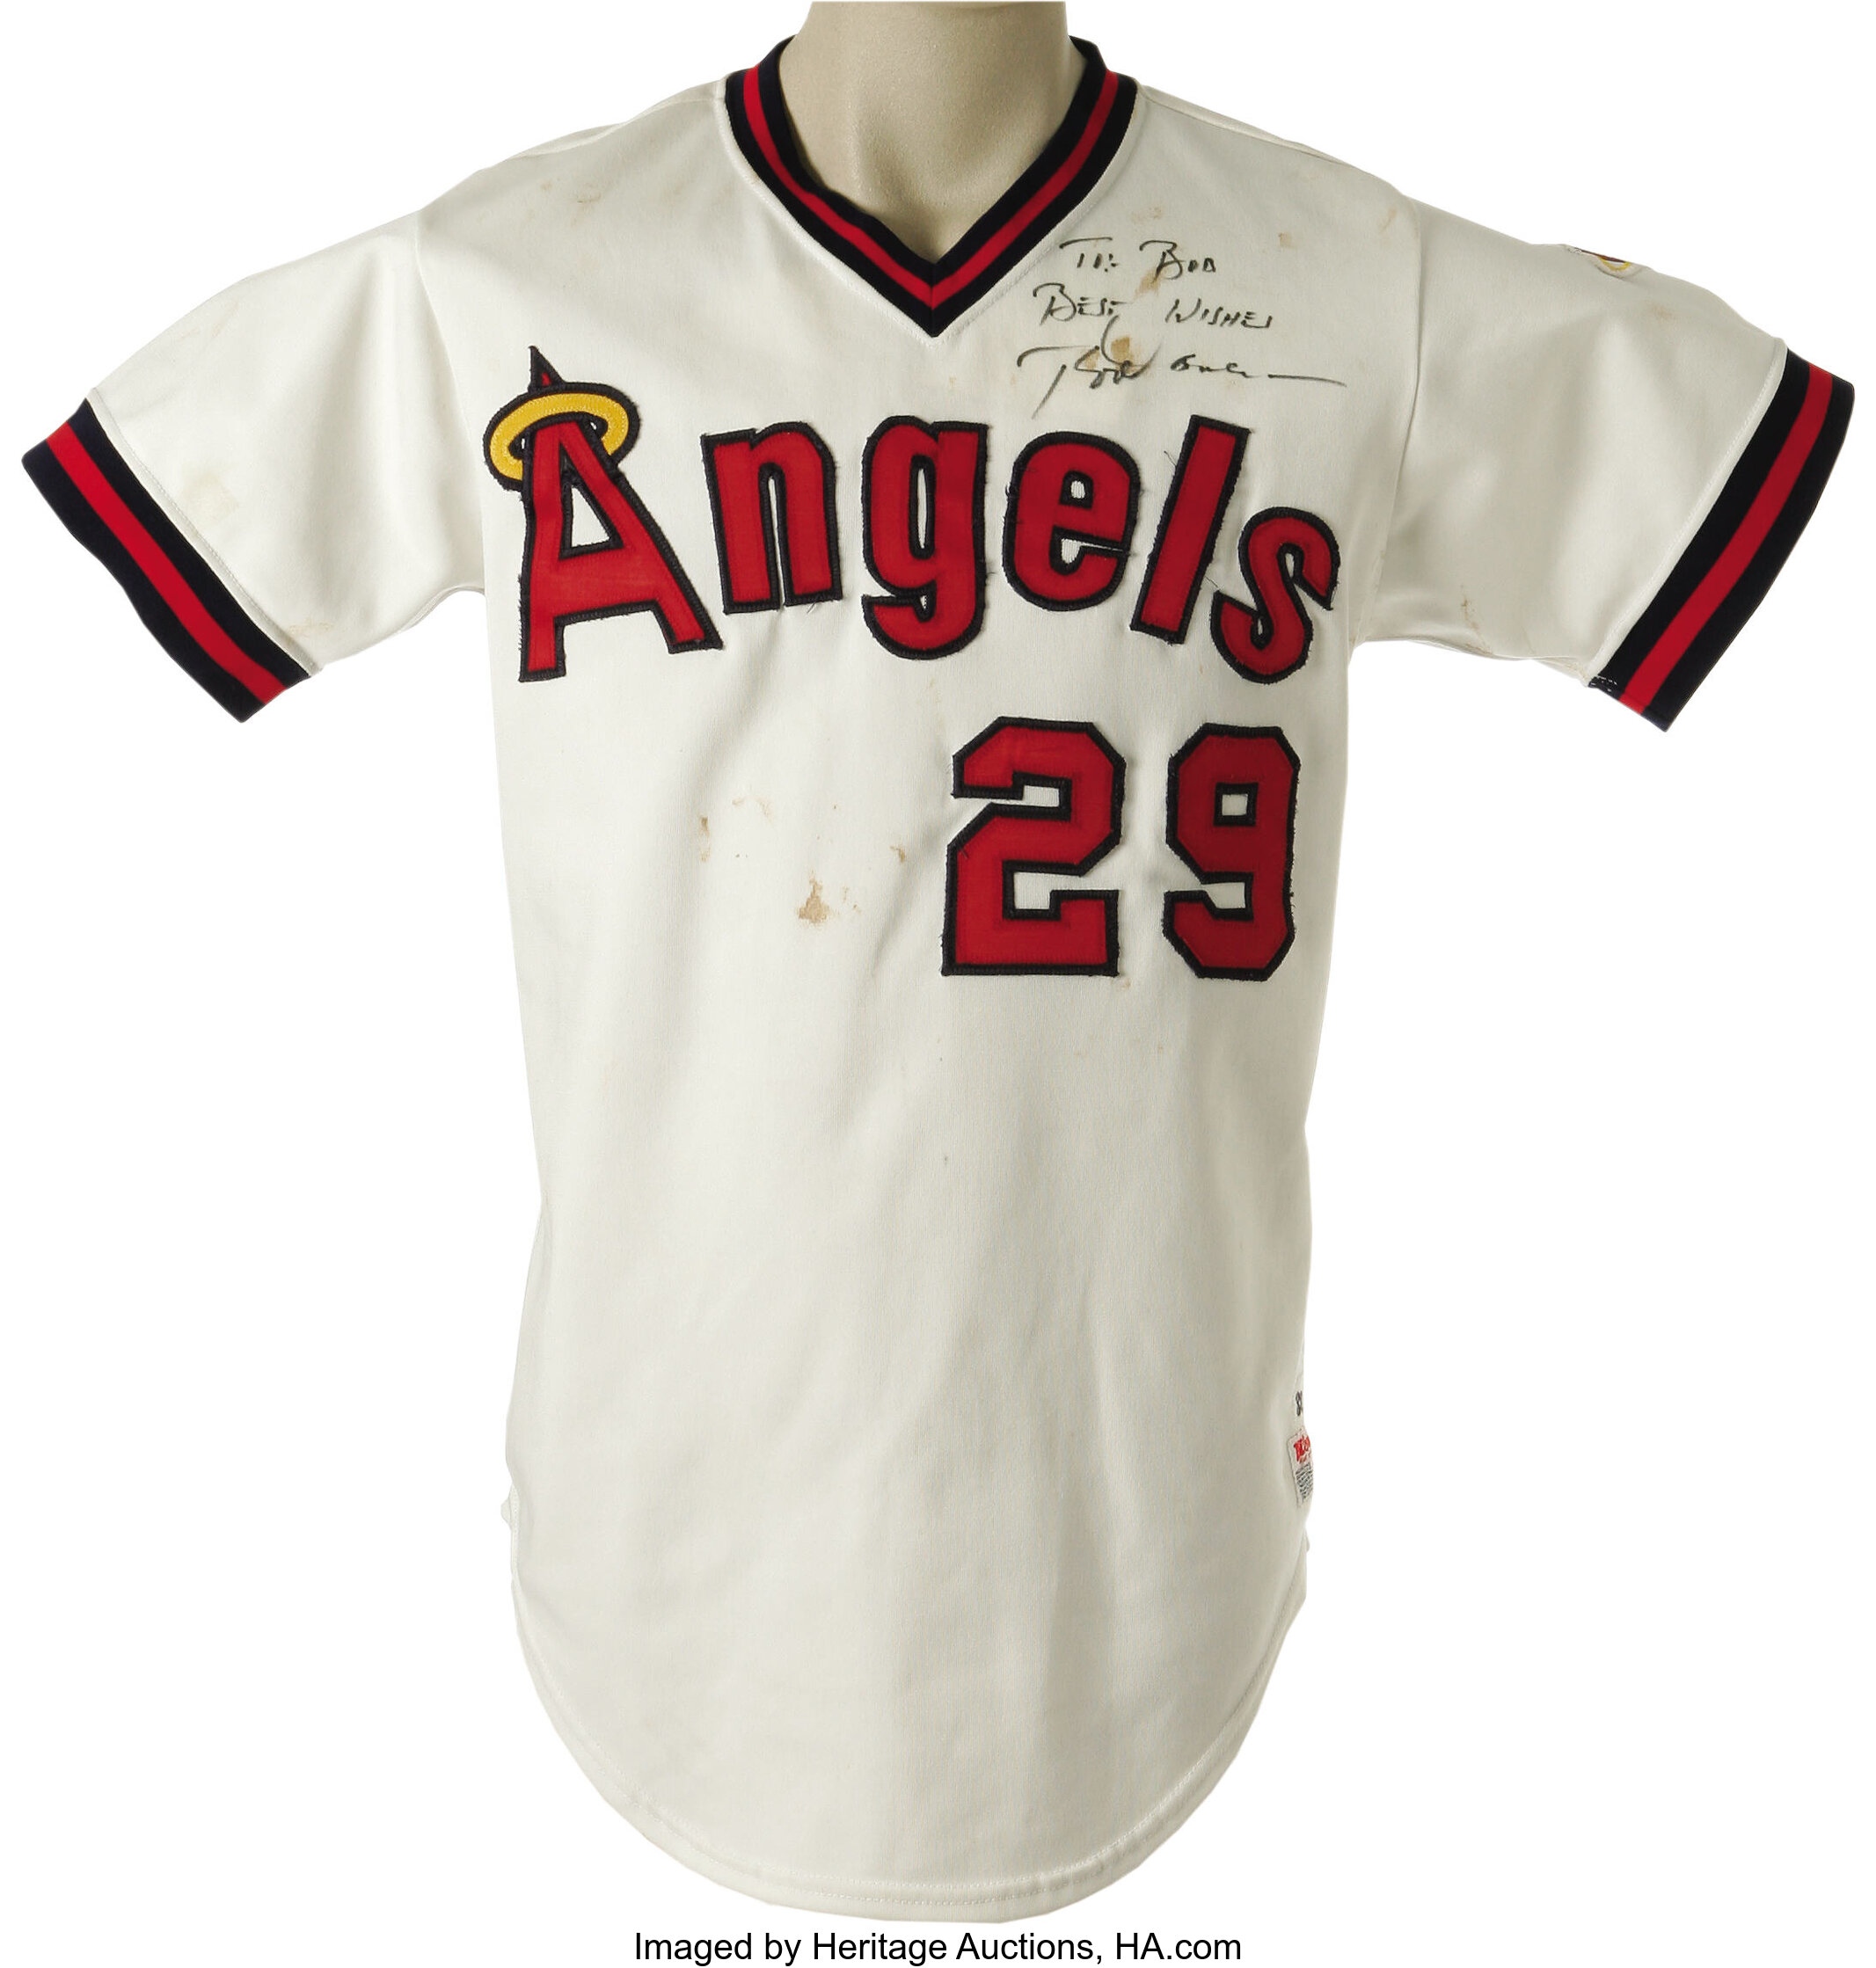 1980 Rod Carew Game Worn Jersey. A fourteenth All-Star season for